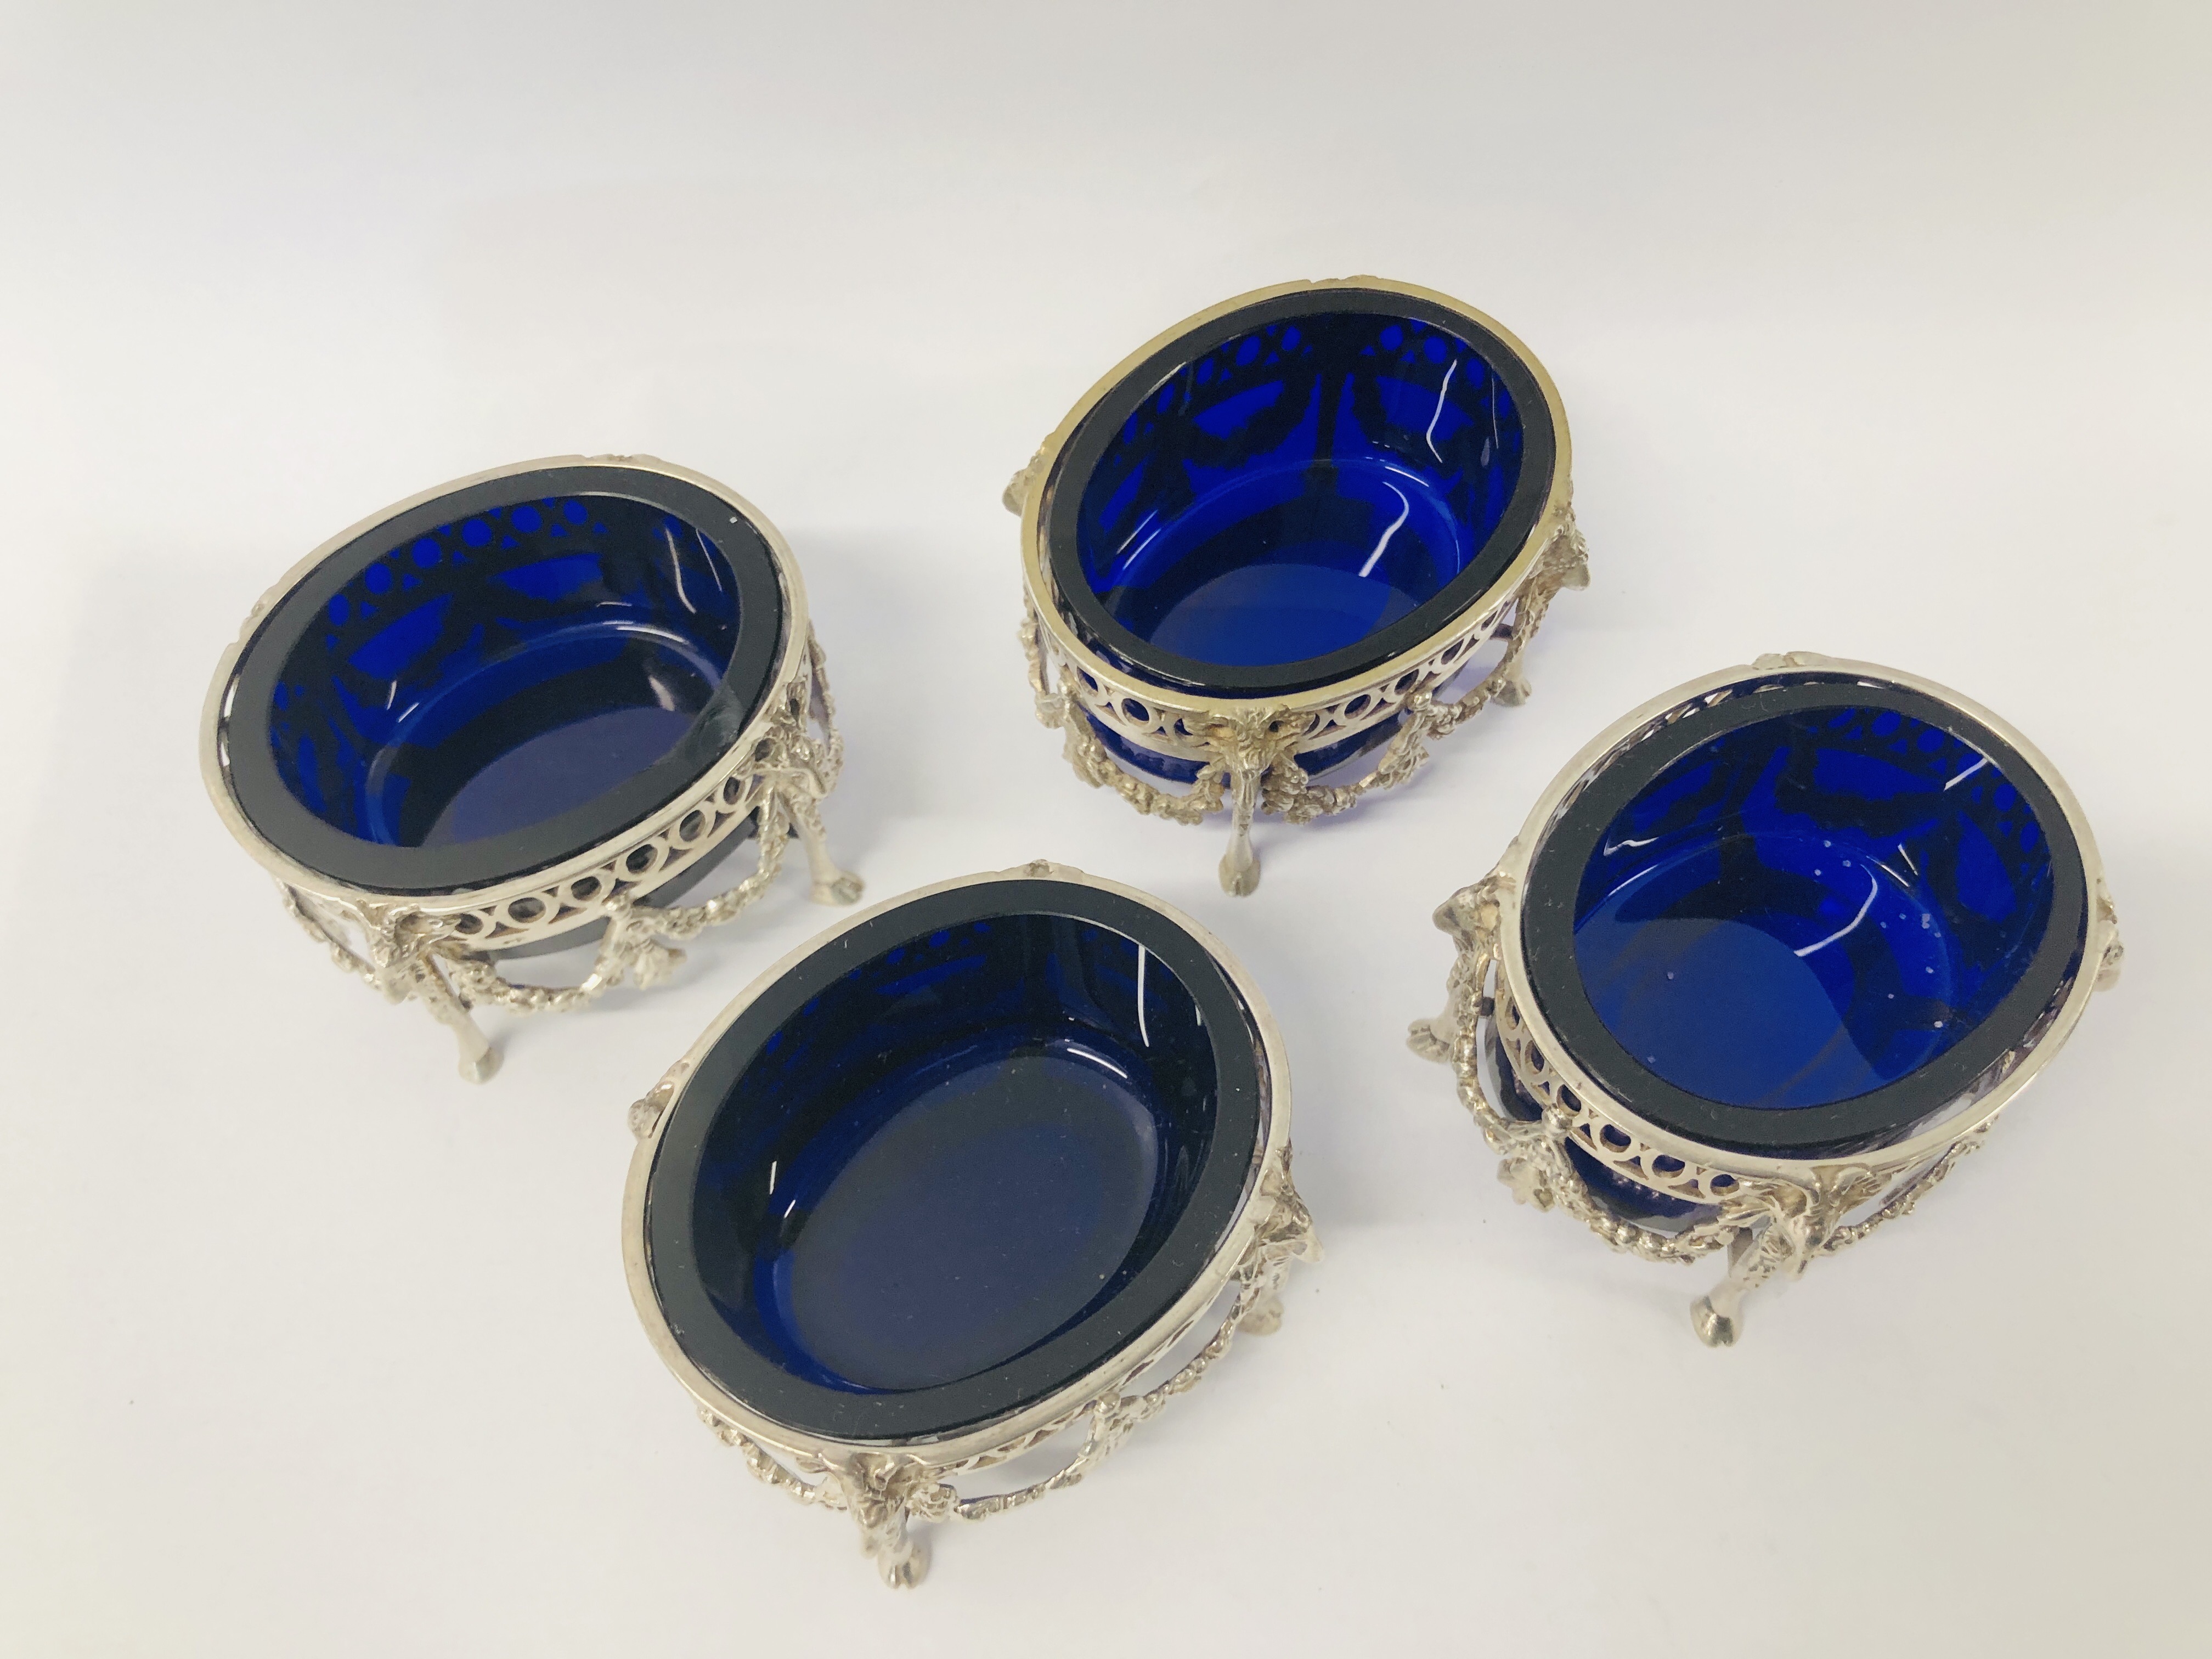 FOUR DUTCH SILVER SALTS WITH BLUE GLASS LINERS (ONE LINER A/F) - Image 4 of 17